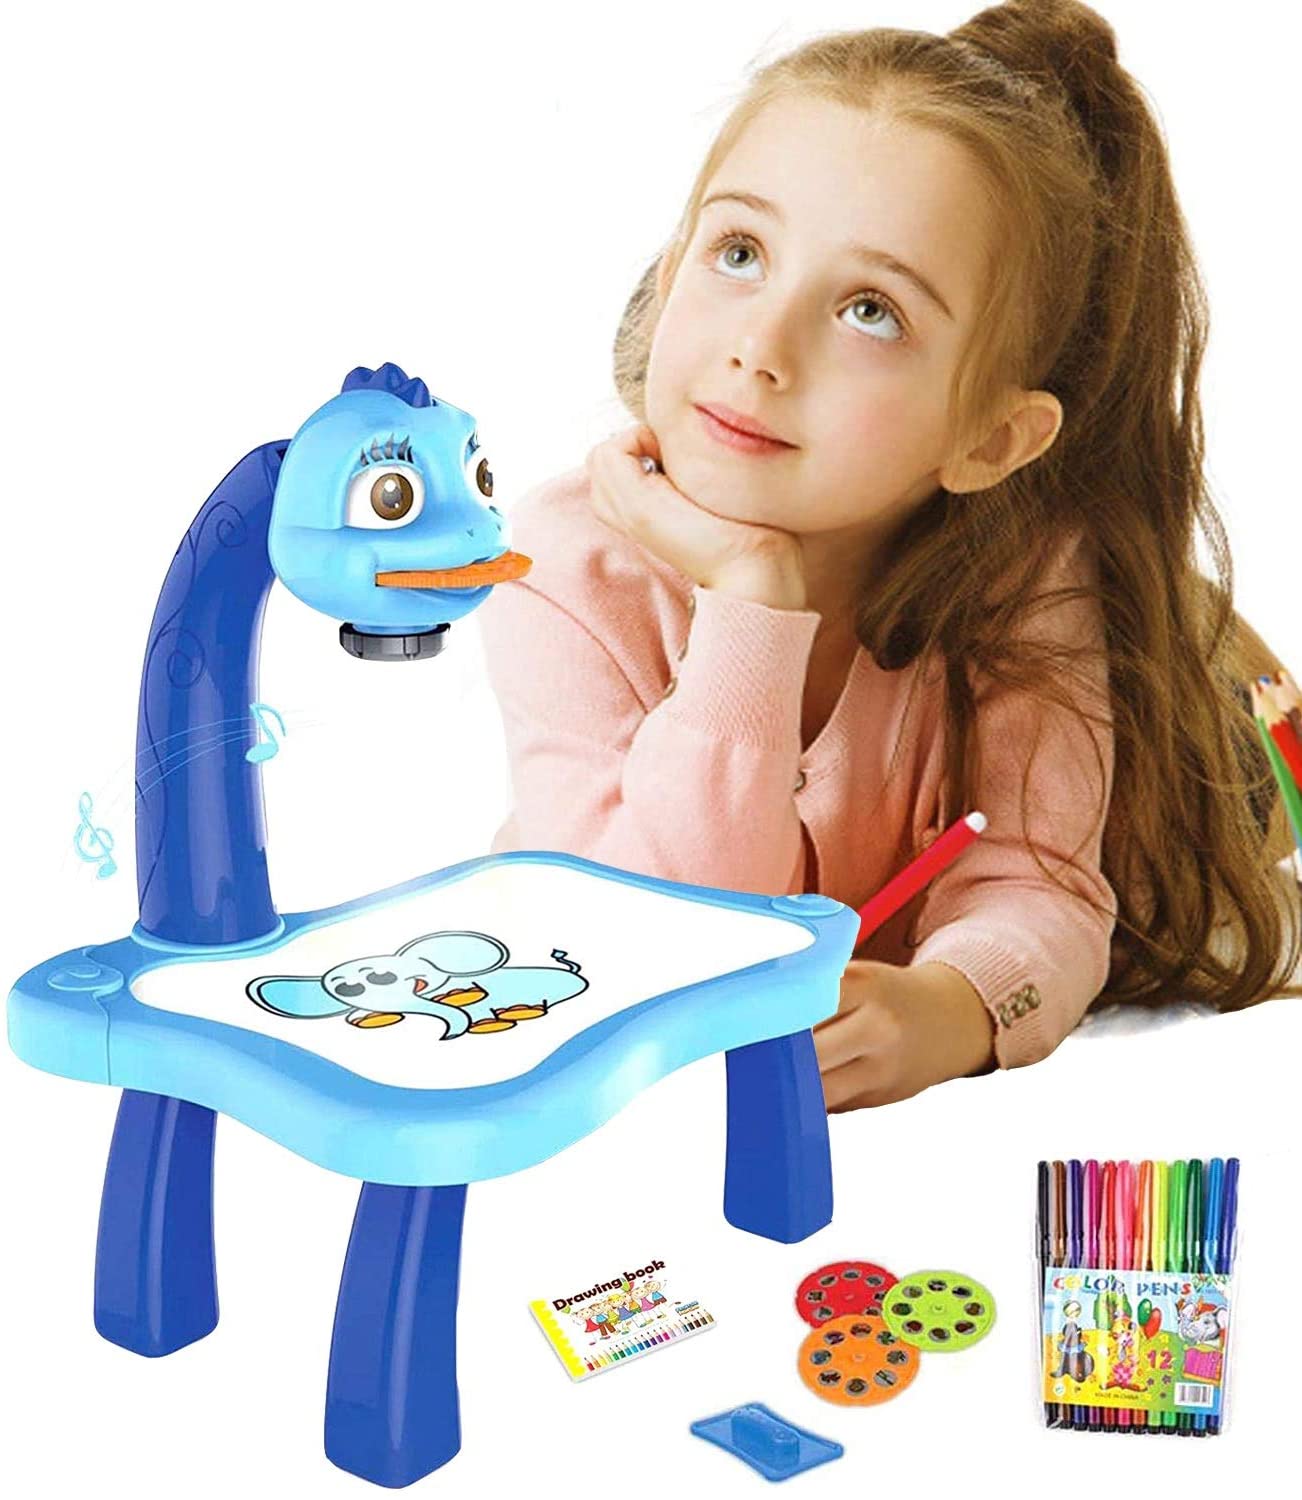 Sunmark Trace and Draw Projector Toy,Art Projector, Painting Drawing Table LED Projector Toddler Toy Educational Drawing Playset for Kids Boys Girls Age 3+